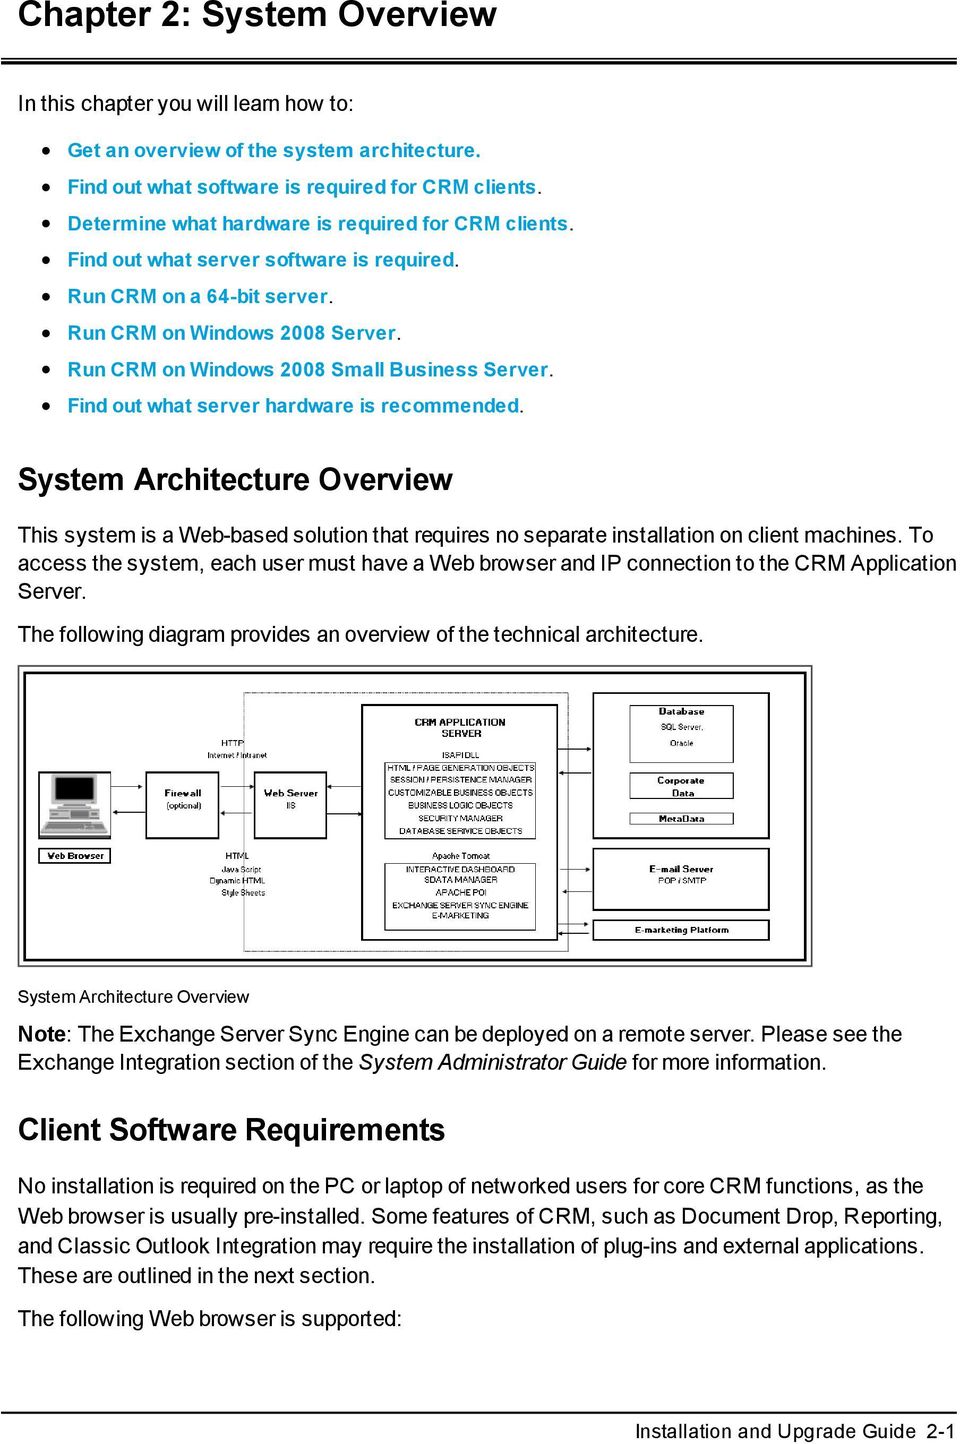 Run CRM on Windows 2008 Small Business Server. Find out what server hardware is recommended.